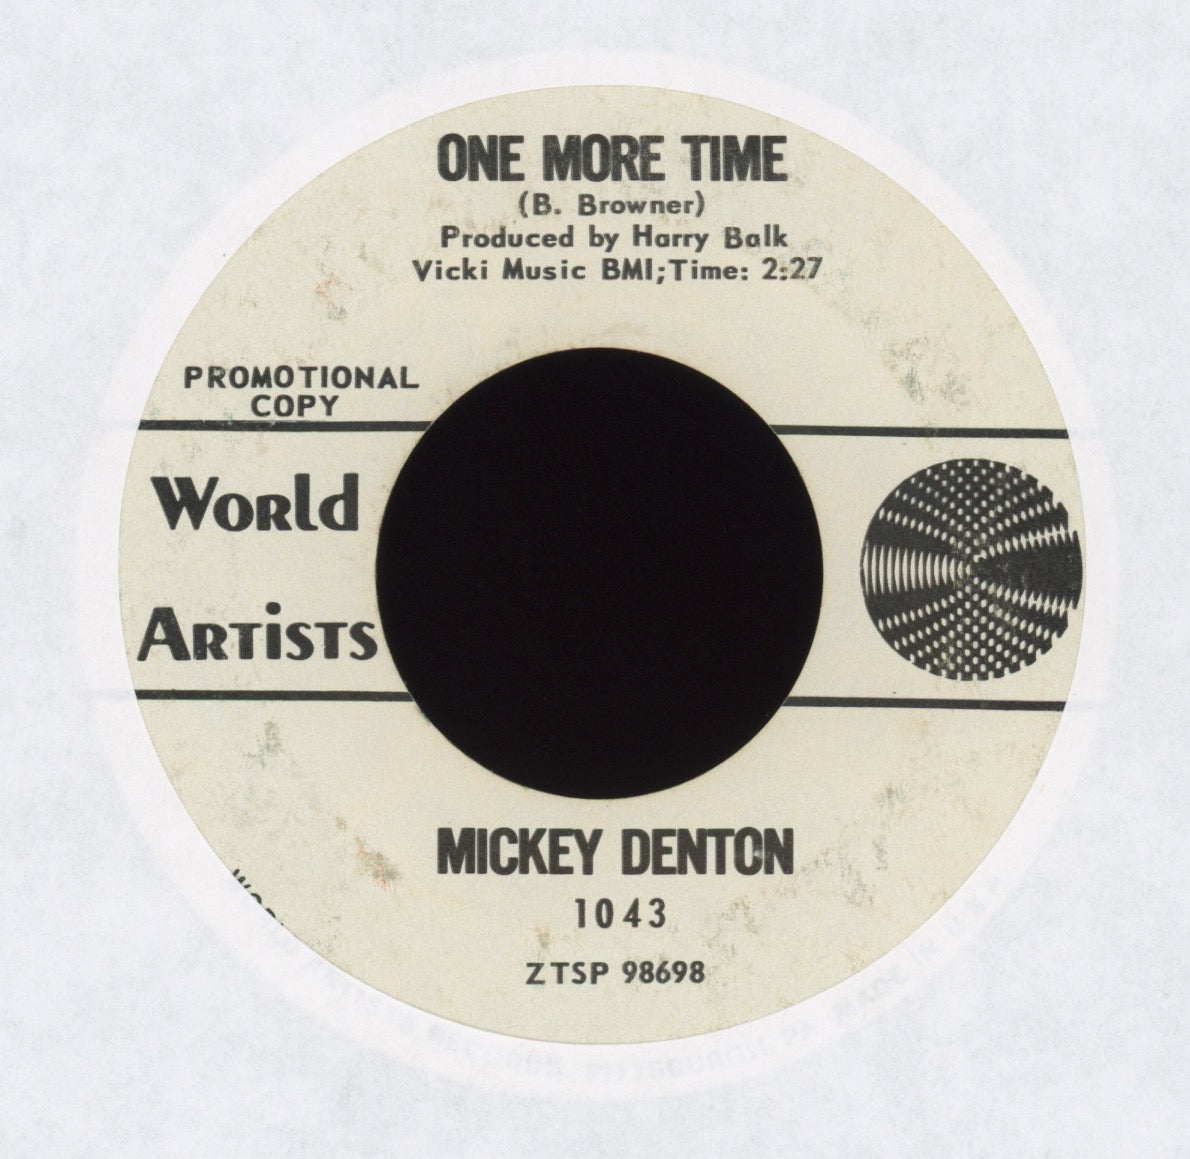 Mickey Denton - One More Time on World Artists Promo